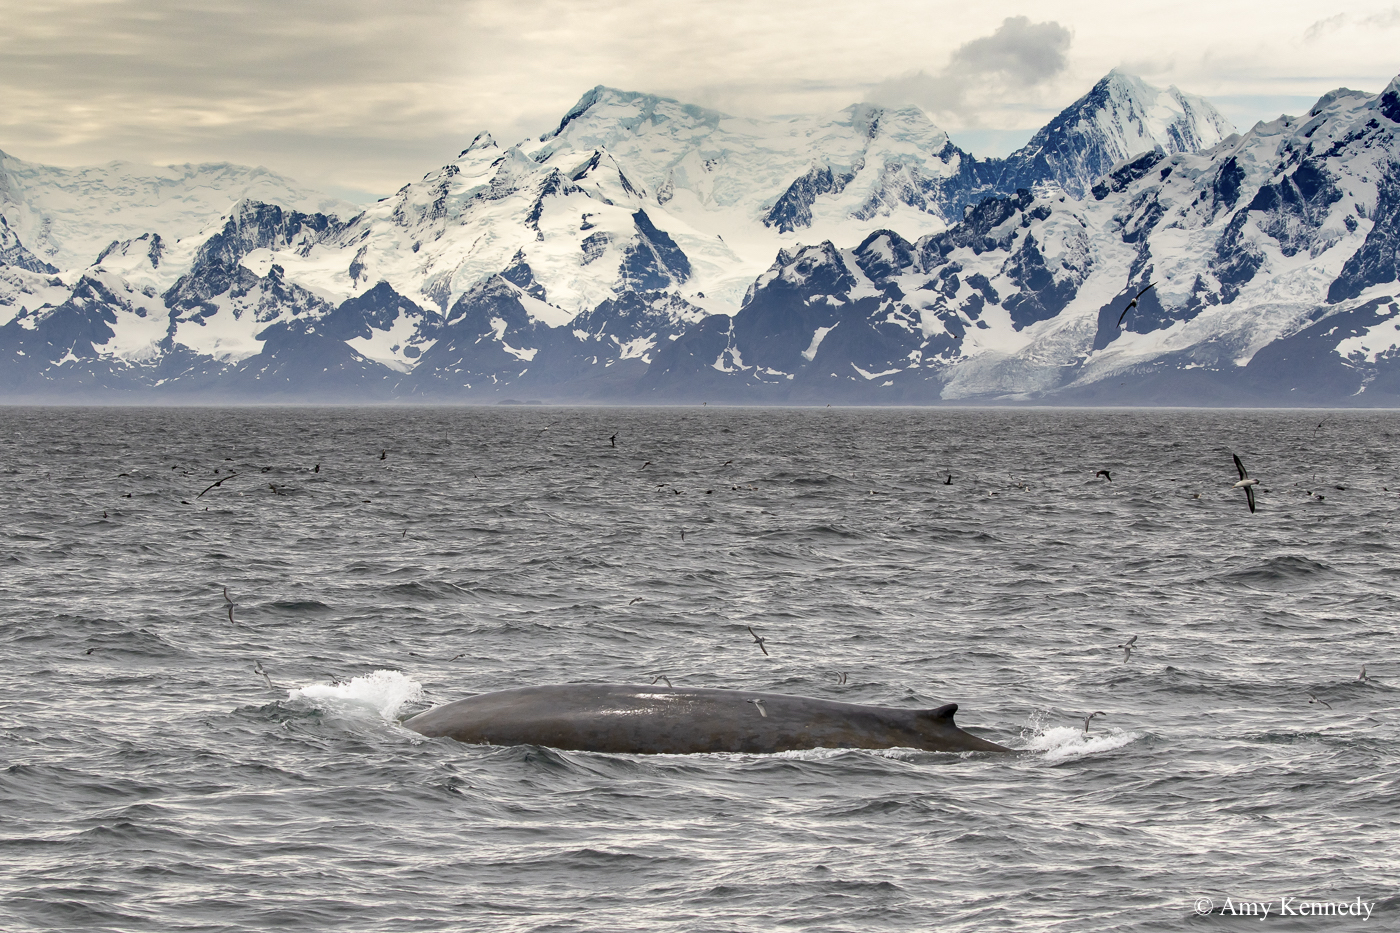 A whale breaking through the water in front of snow capped mountains